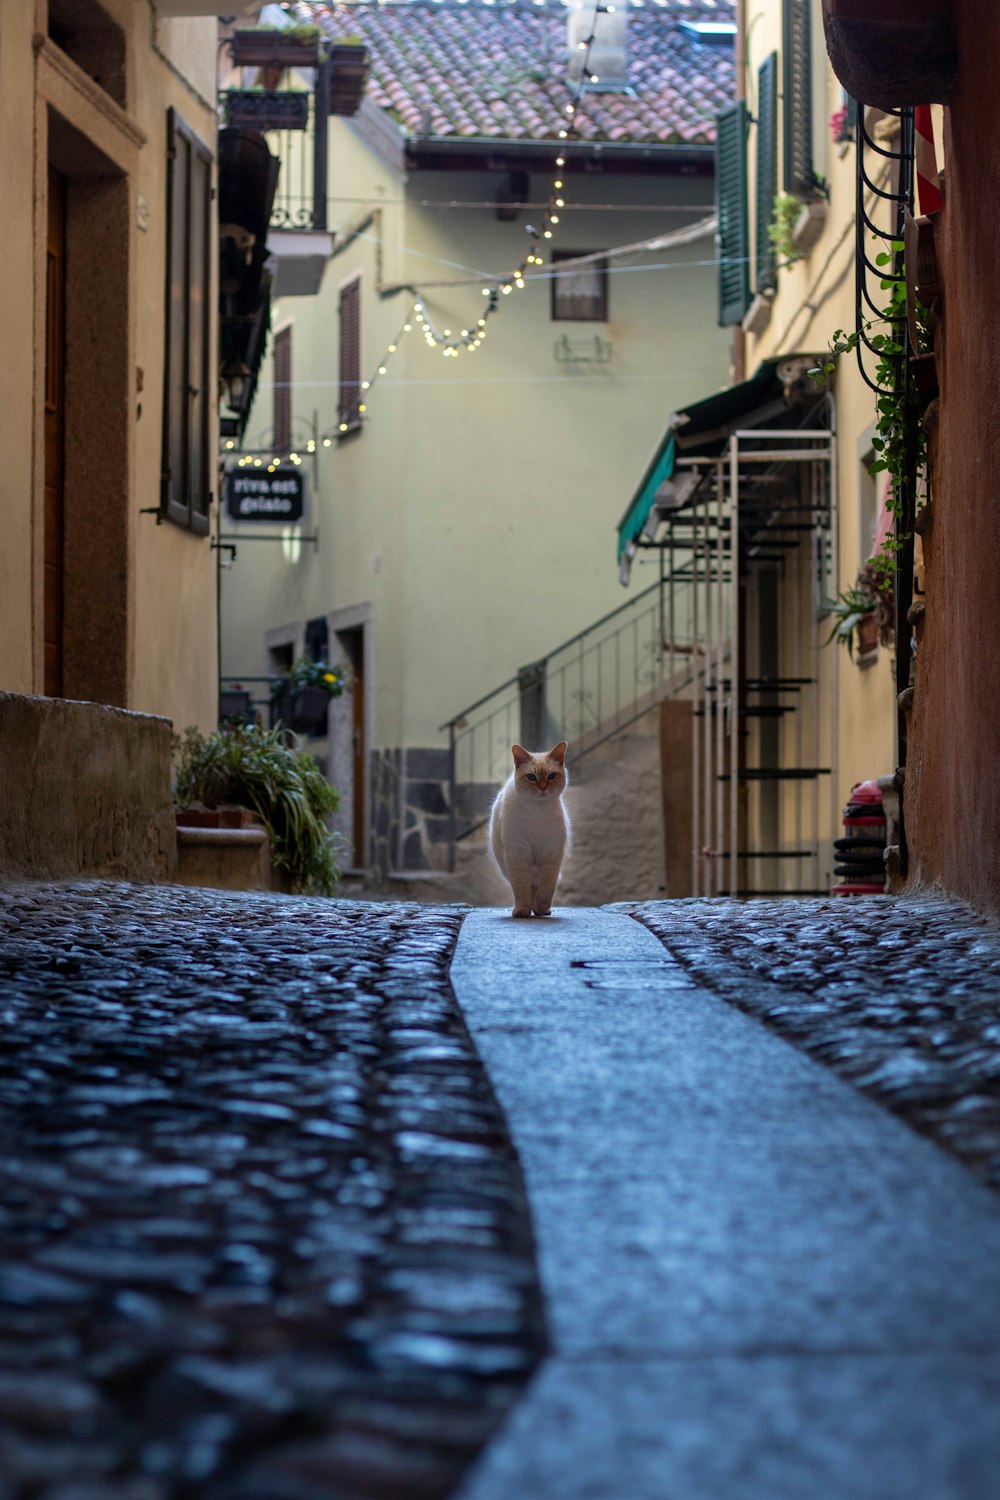 a cat sitting on a stone walkway